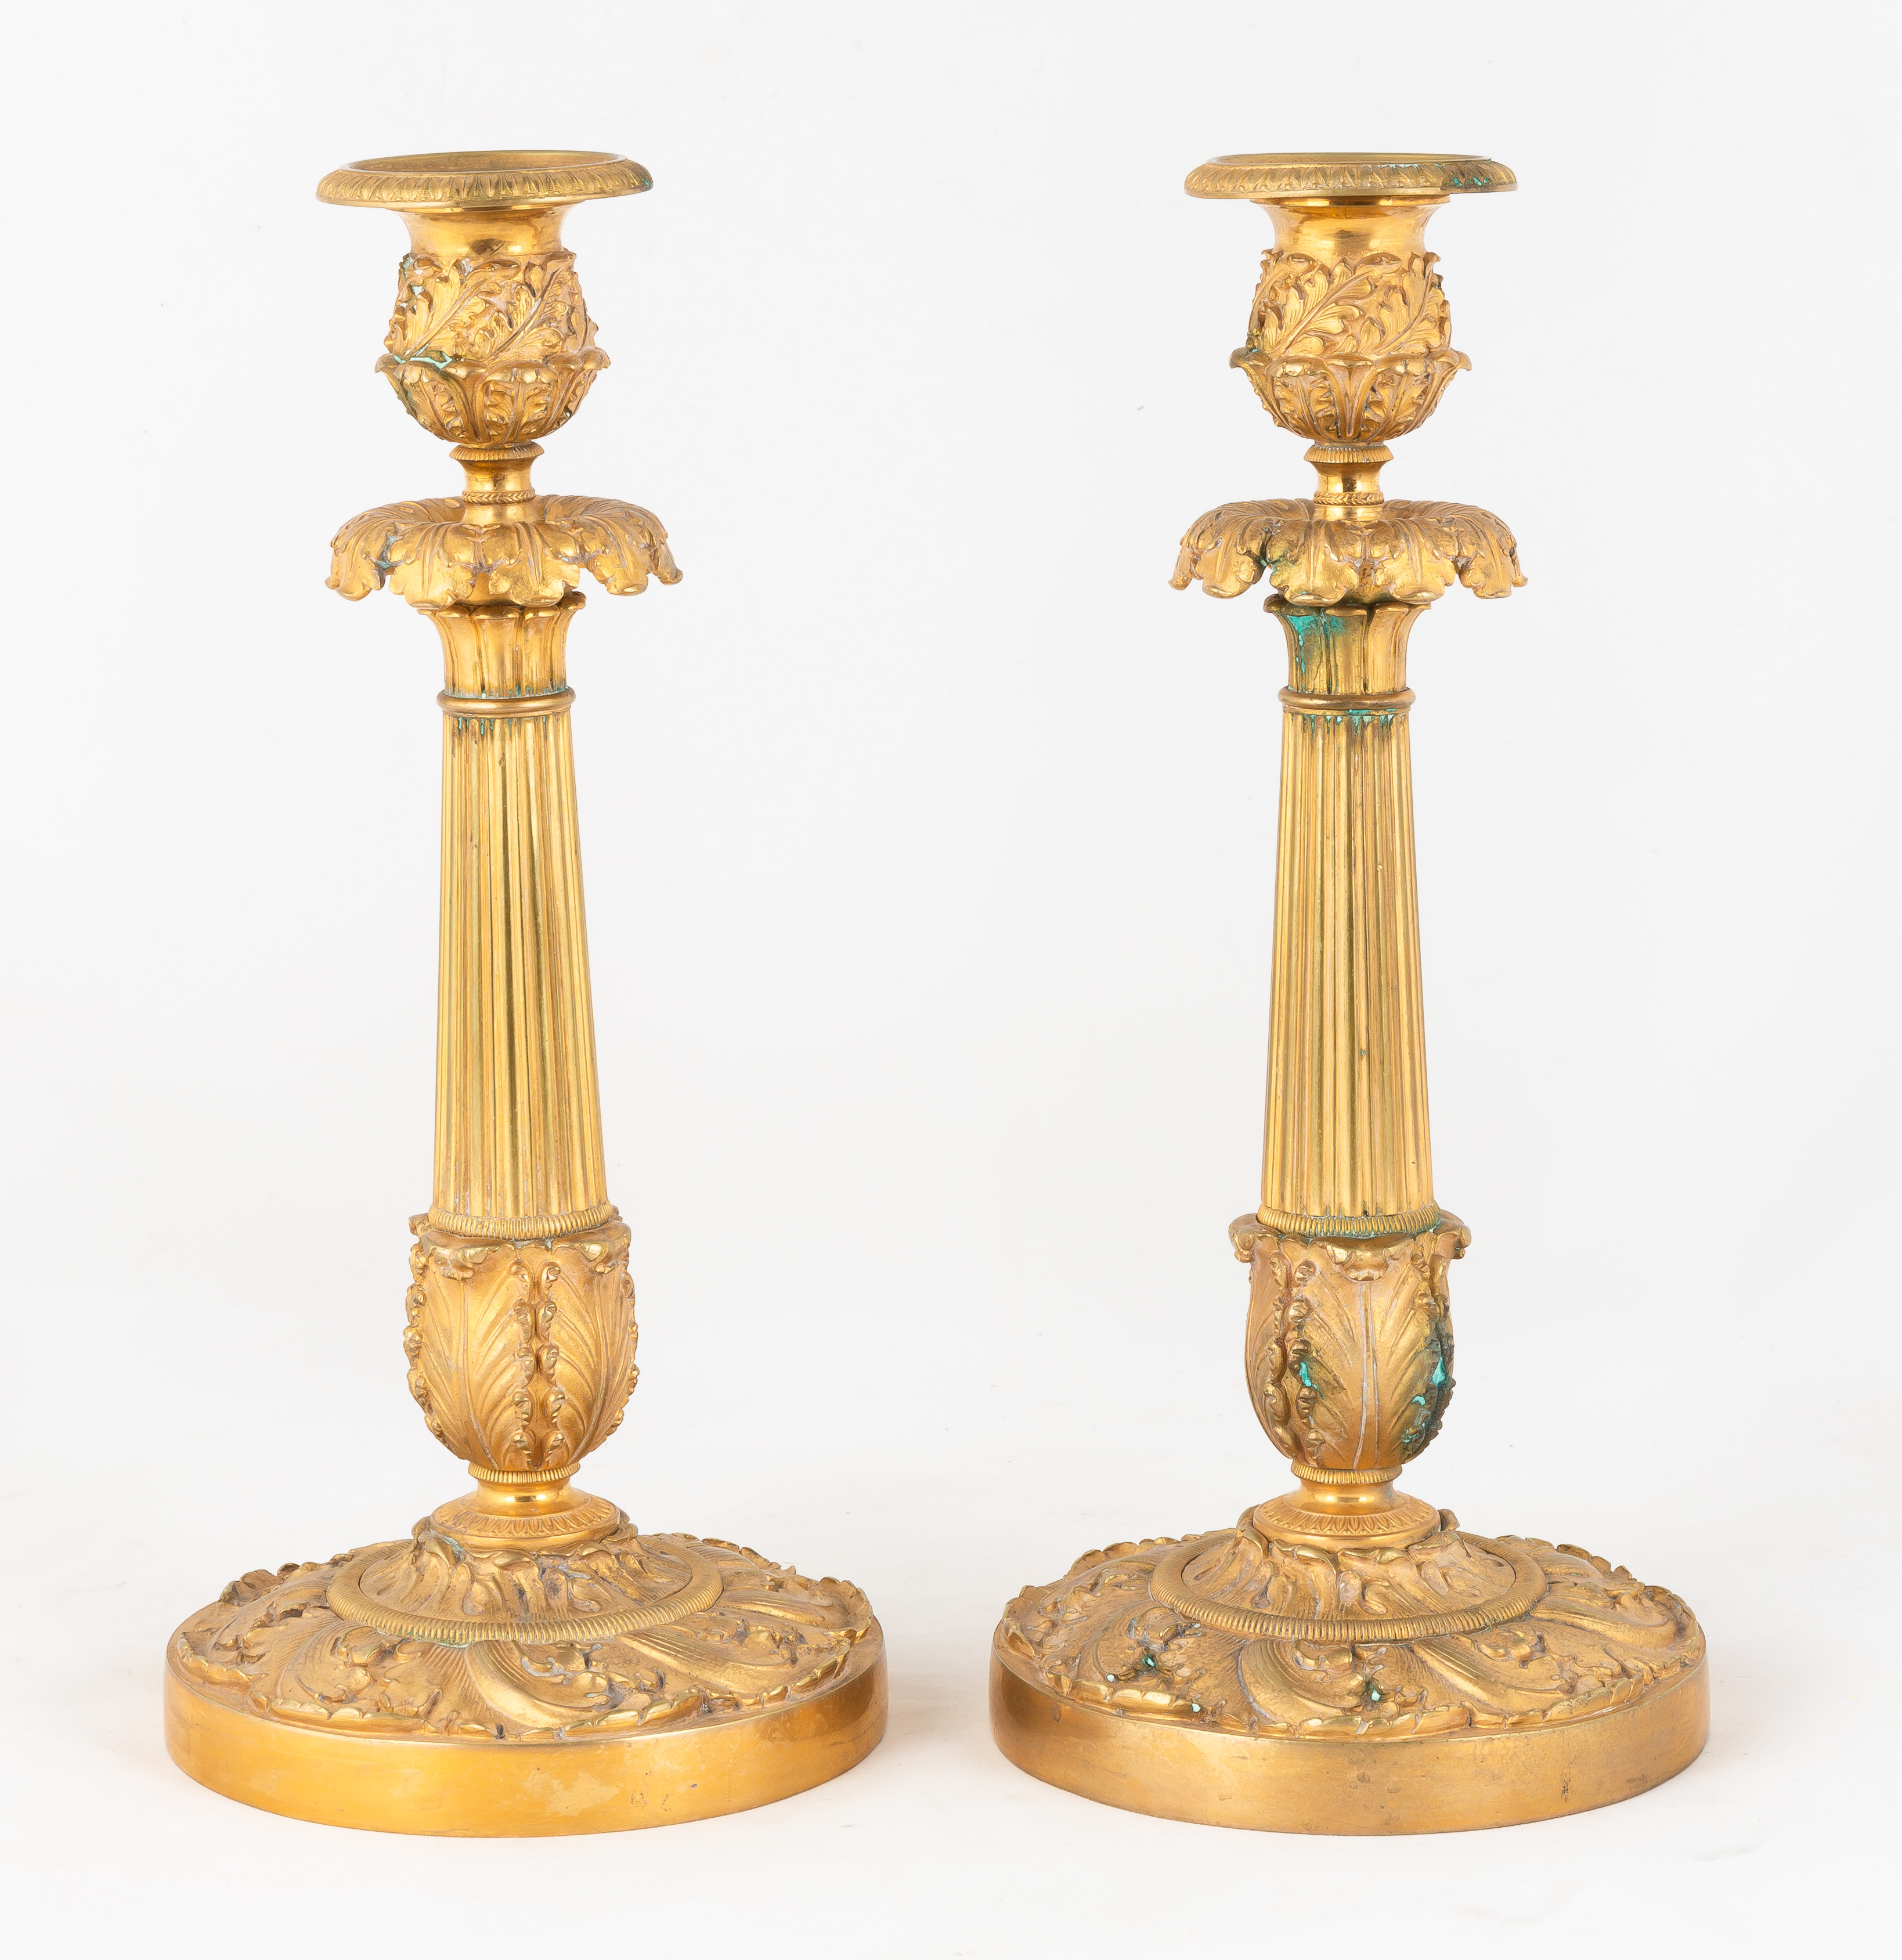 PAIR OF FRENCH ORMULU BRONZE CANDLESTICKS 35293c